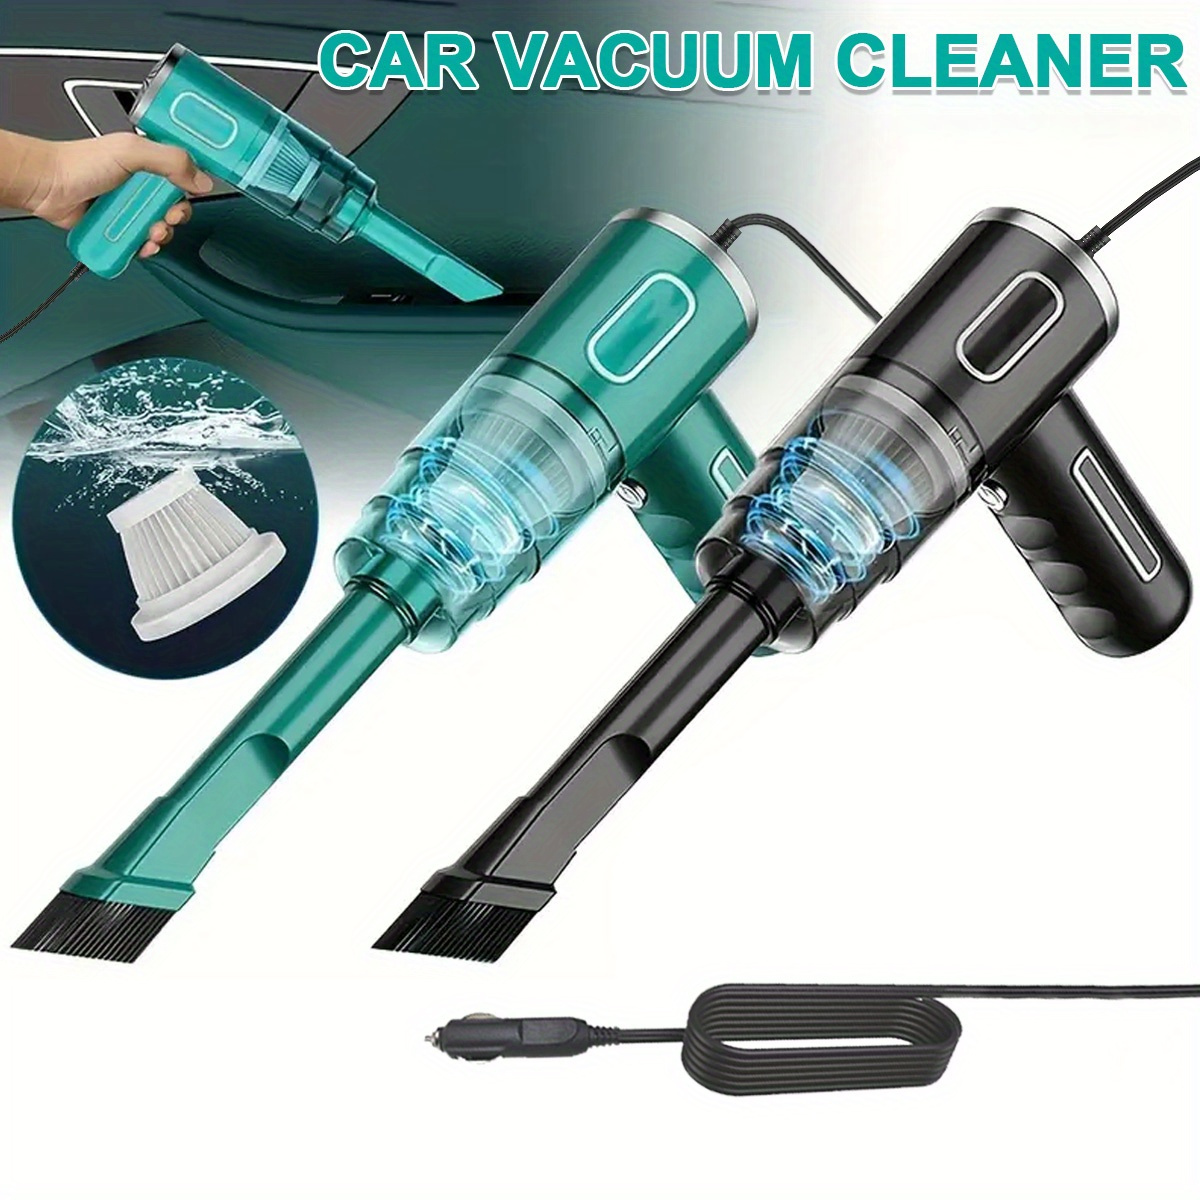 

1pc High-power Car Mounted Vacuum Cleaner - Dual-purpose Handheld Wet/dry Cleaning Tool